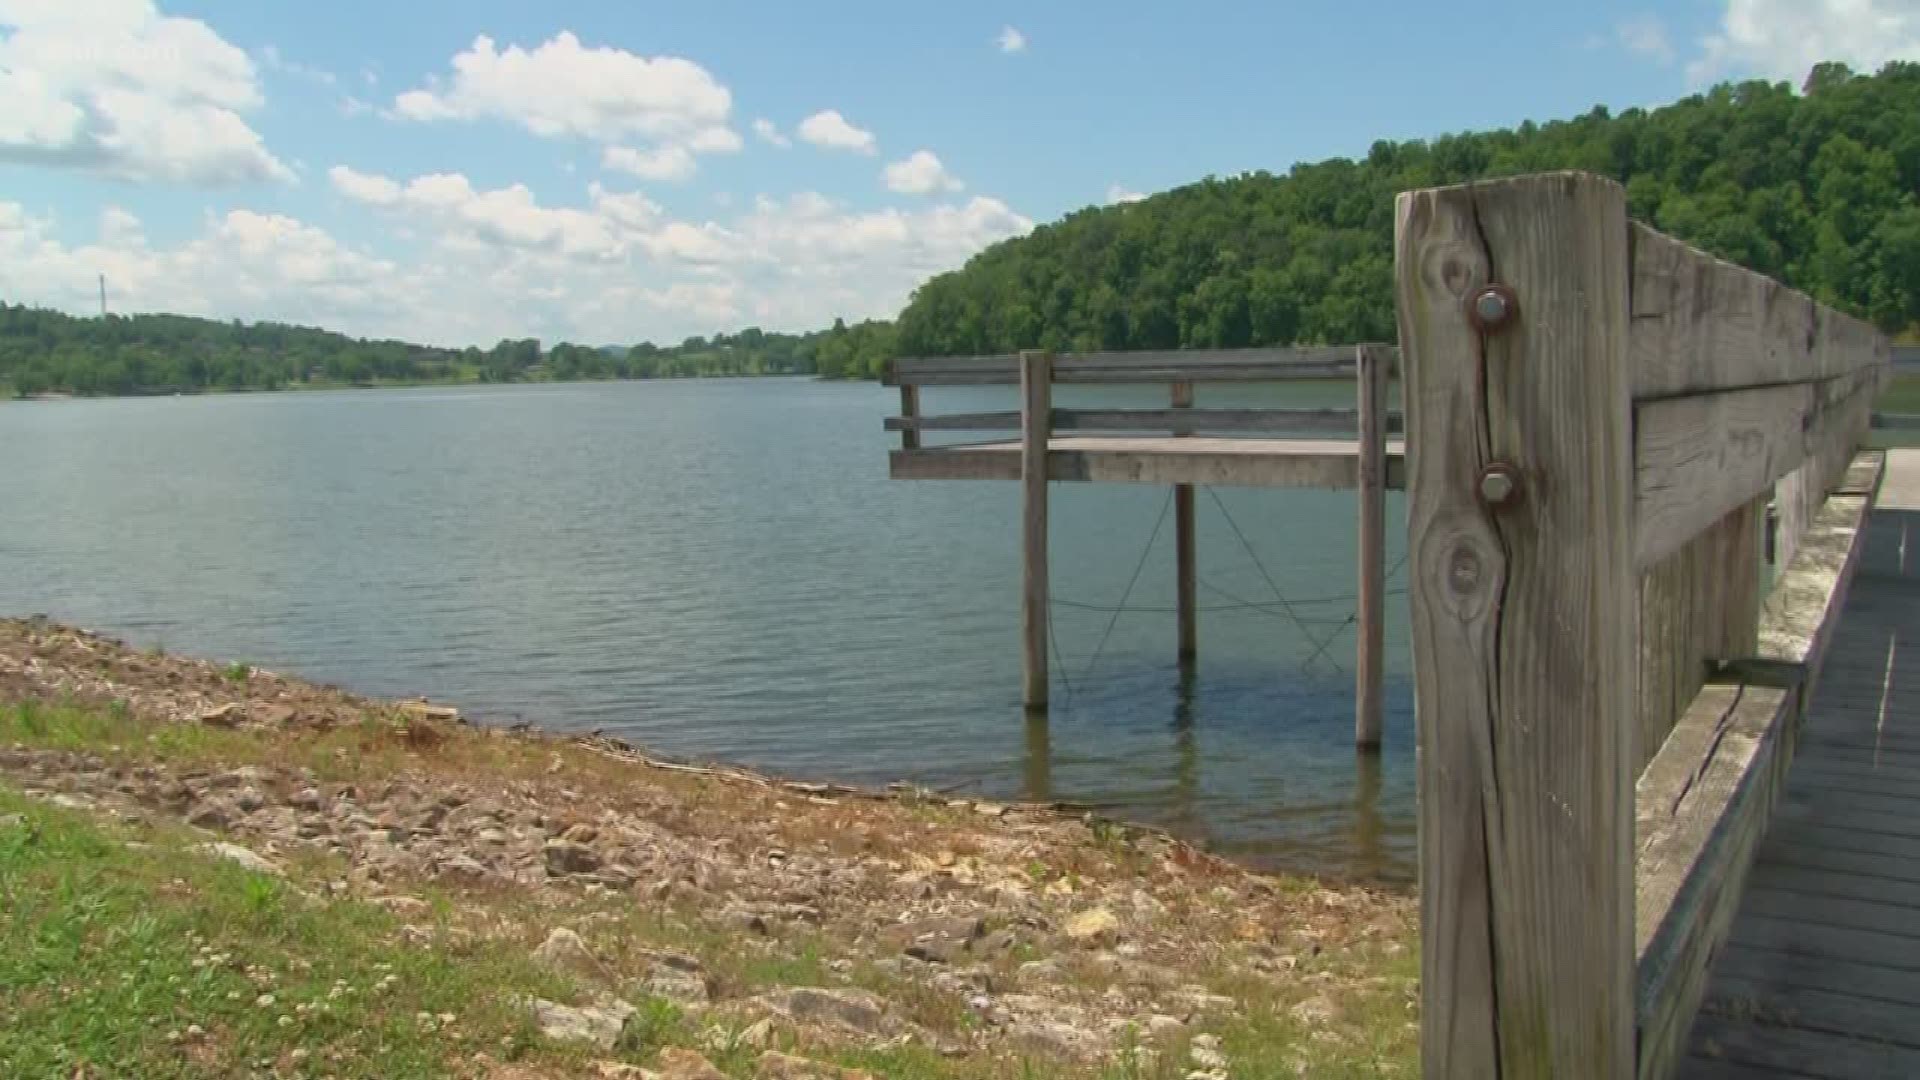 There's 40 miles of the Tennessee River flowing in Roane County, and county leaders are hoping this project will bring more people out to the water.